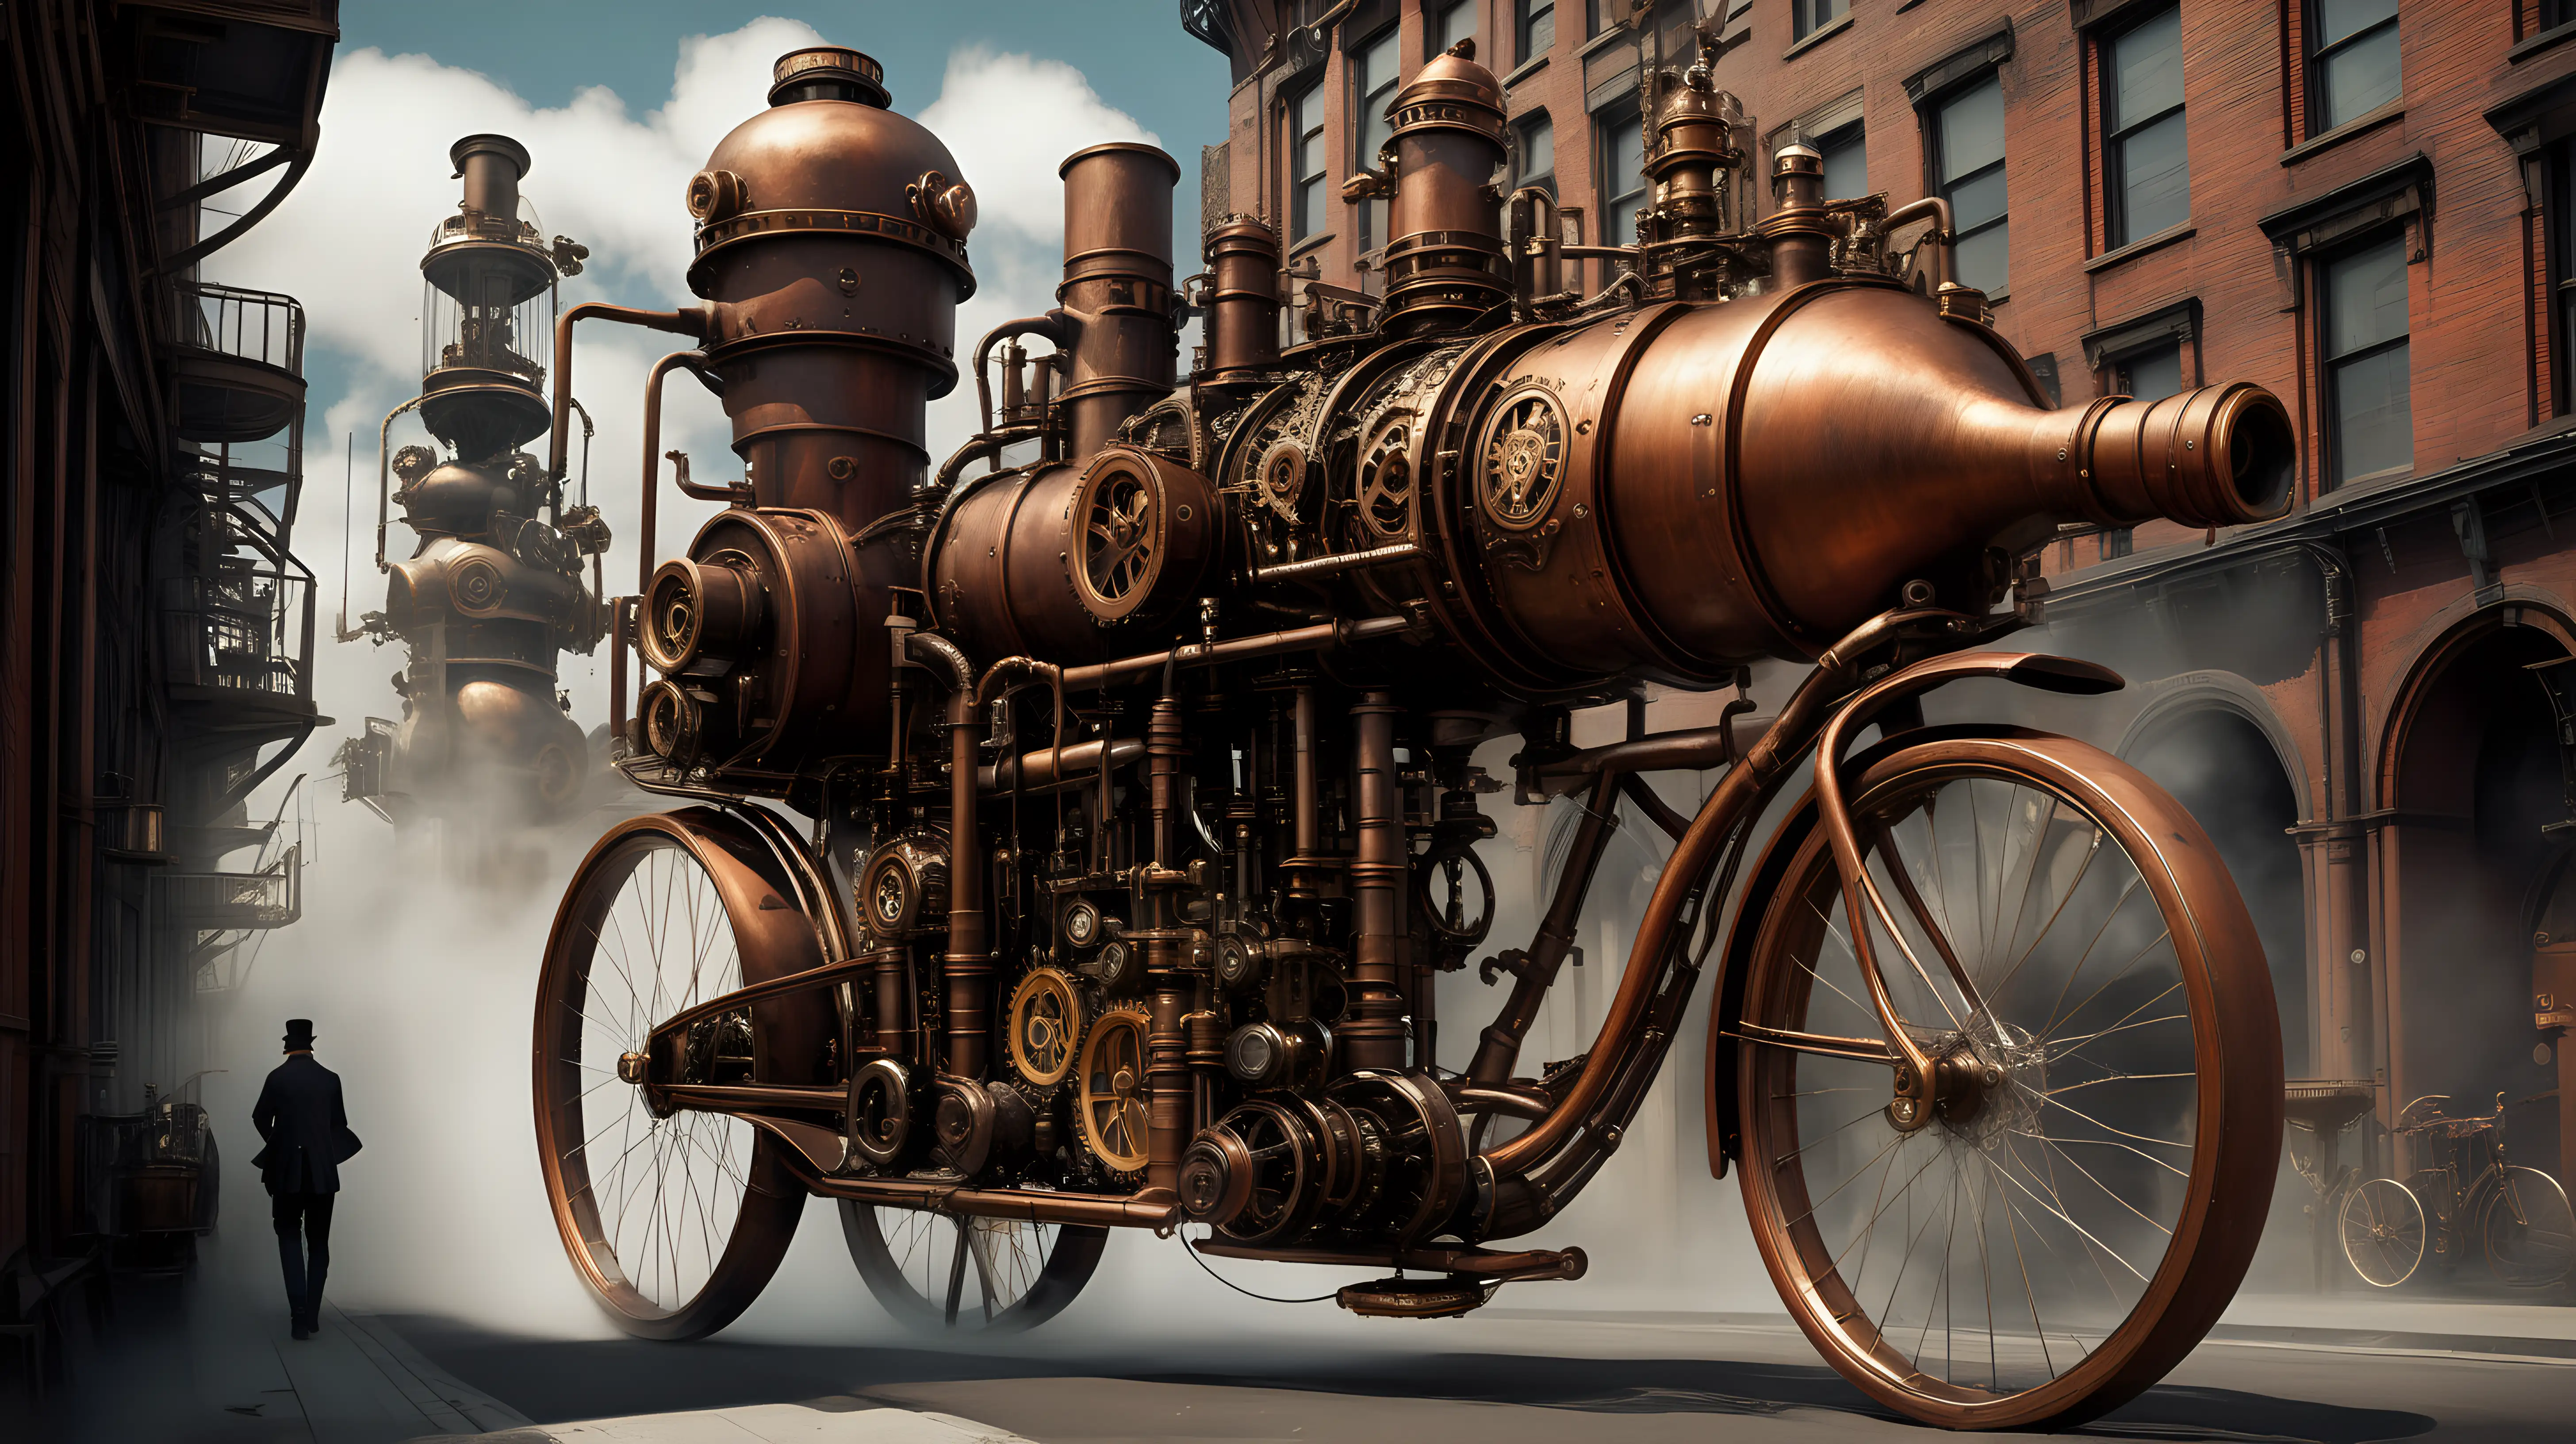 Intricate Steampunk Bicycle with SteamPowered Engine in a Whimsical Cityscape